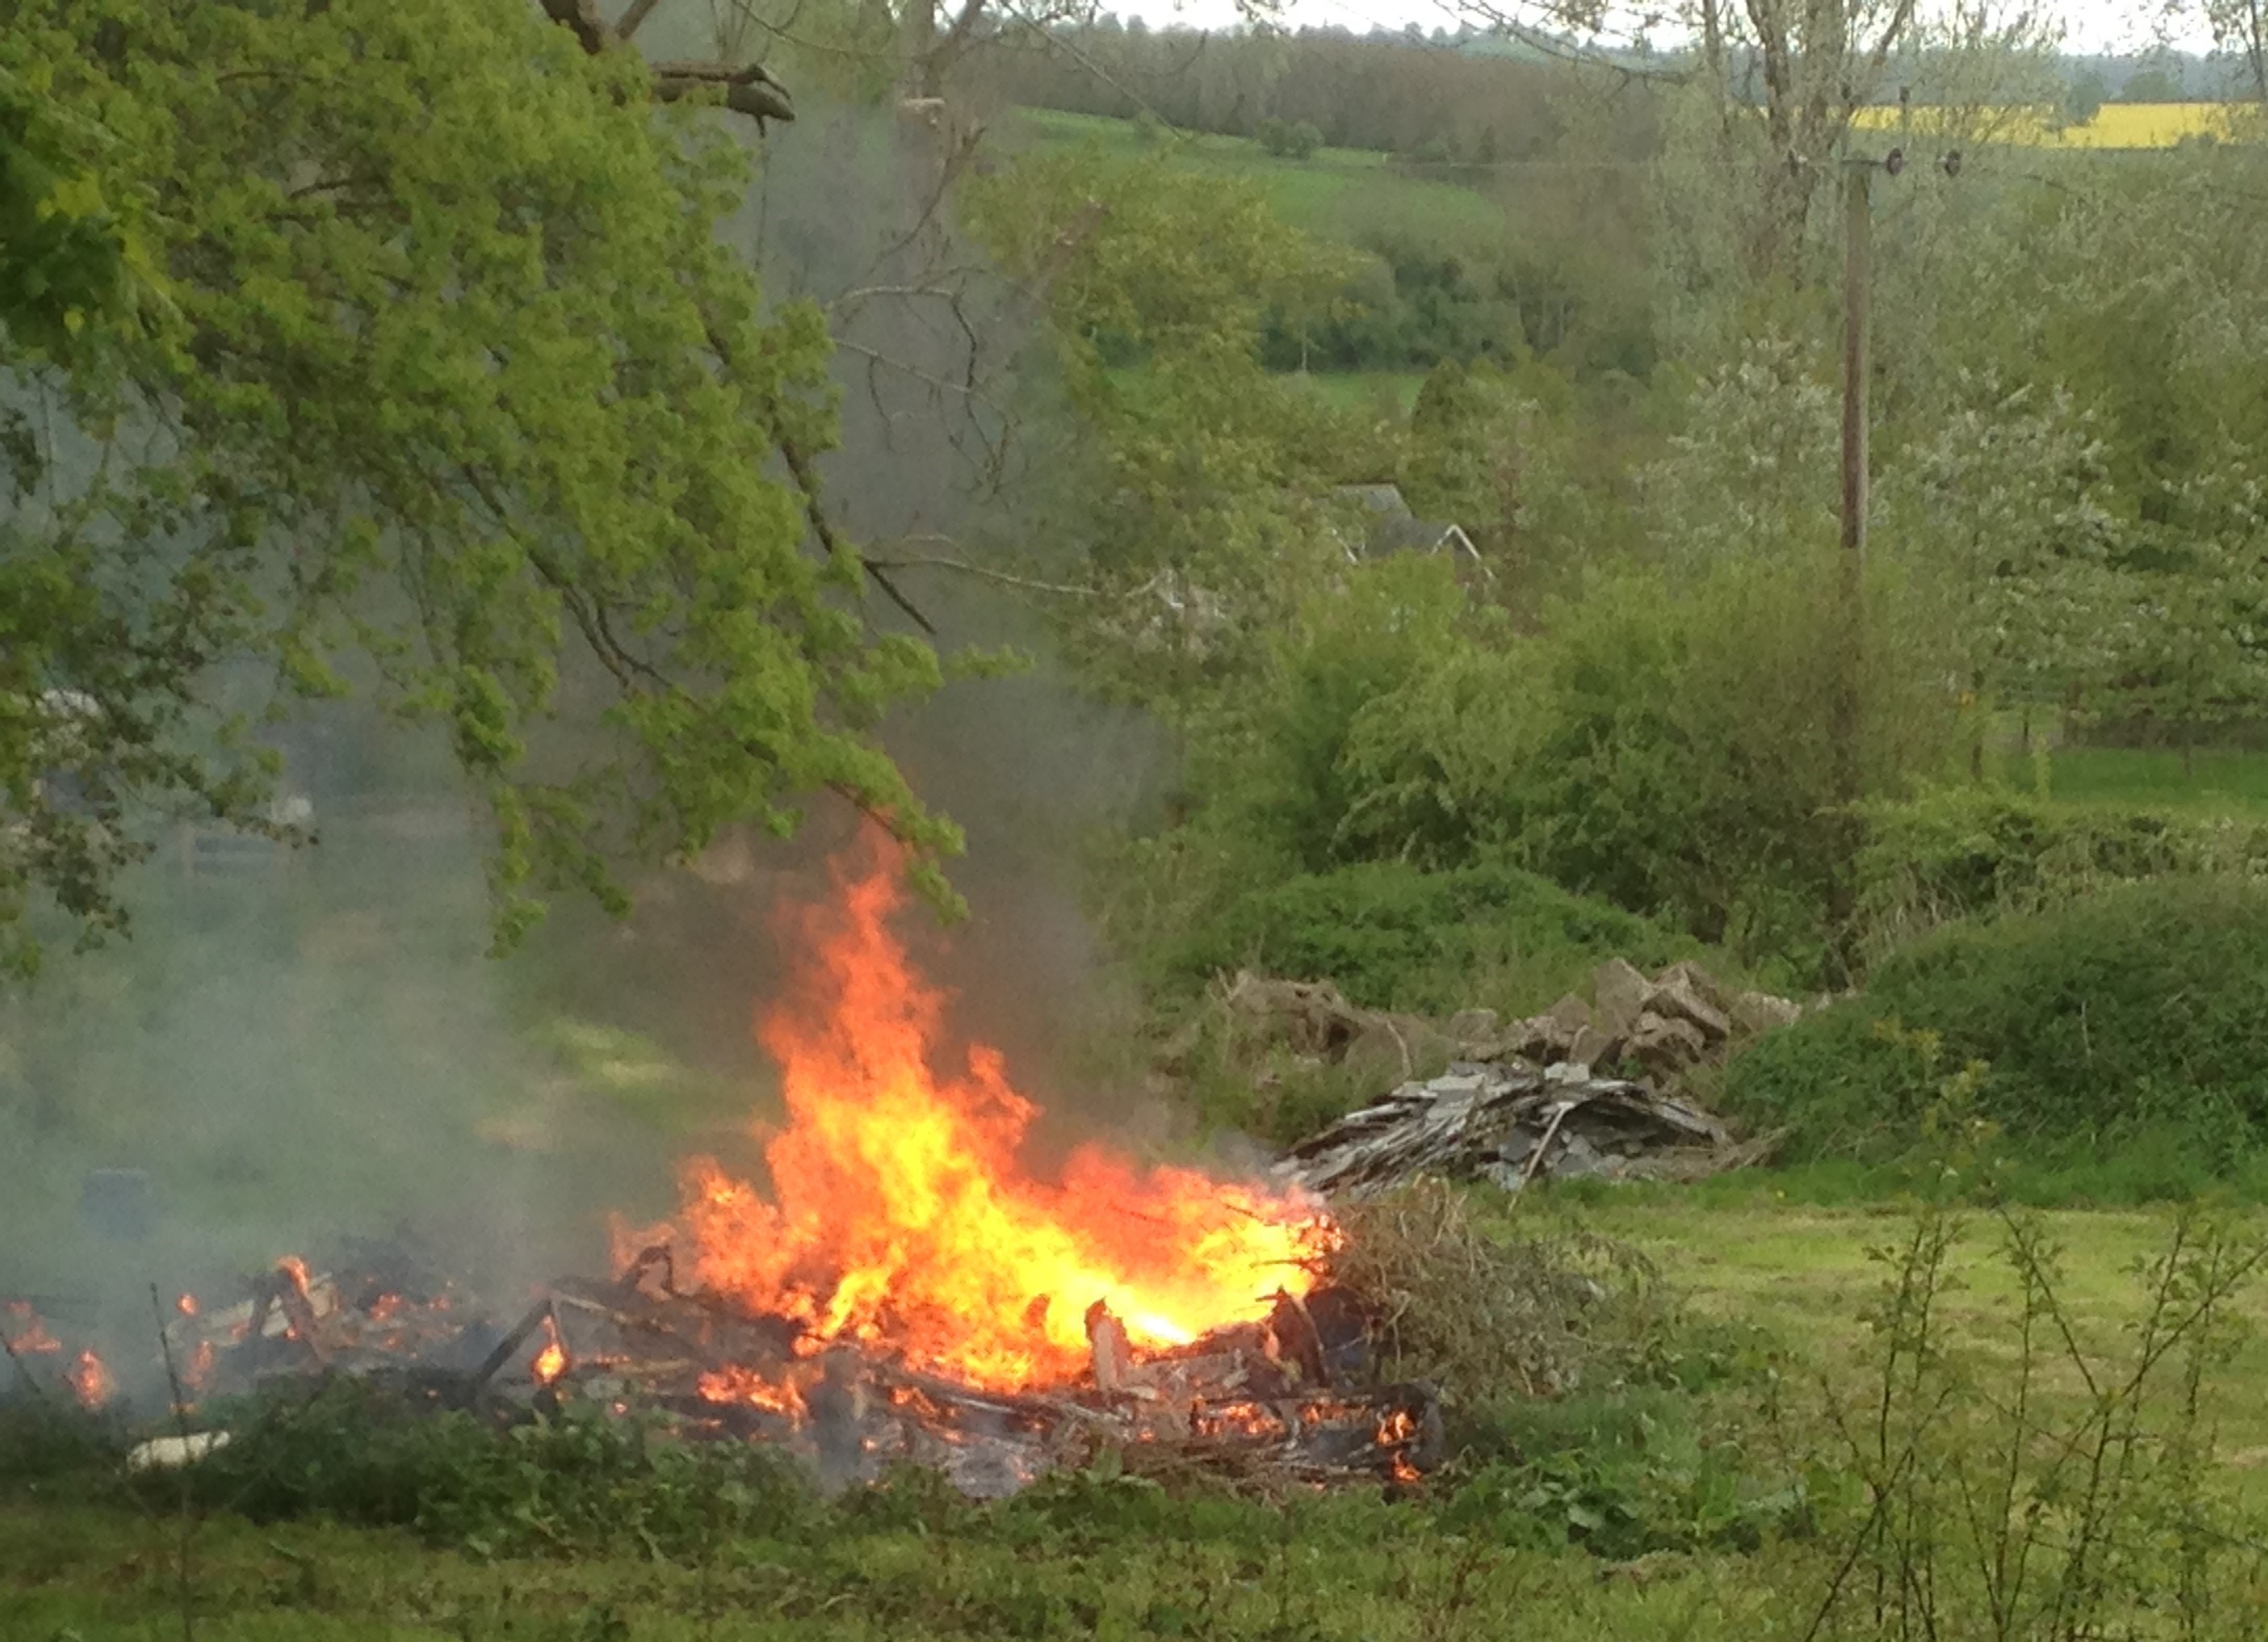 A big fire in a field of burning waste taken by community protection officers at Herefordshire Council